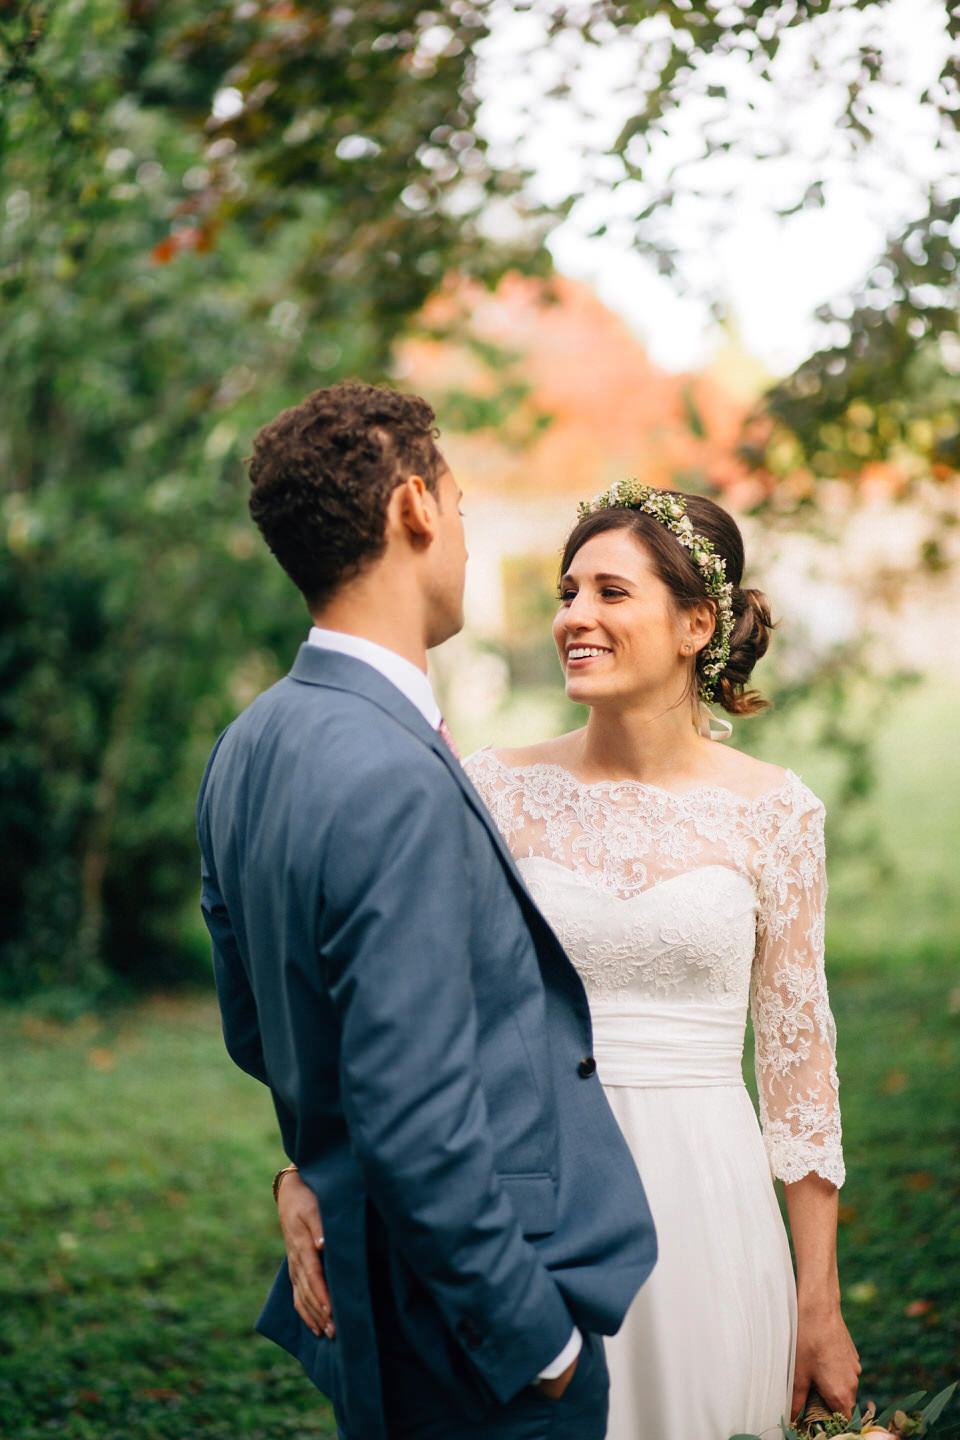 Katie wore a bespoke gown by London based designer Shanna Melville for her romantic Autumn wedding in the Cotswolds. Photography by Joseph Hall.